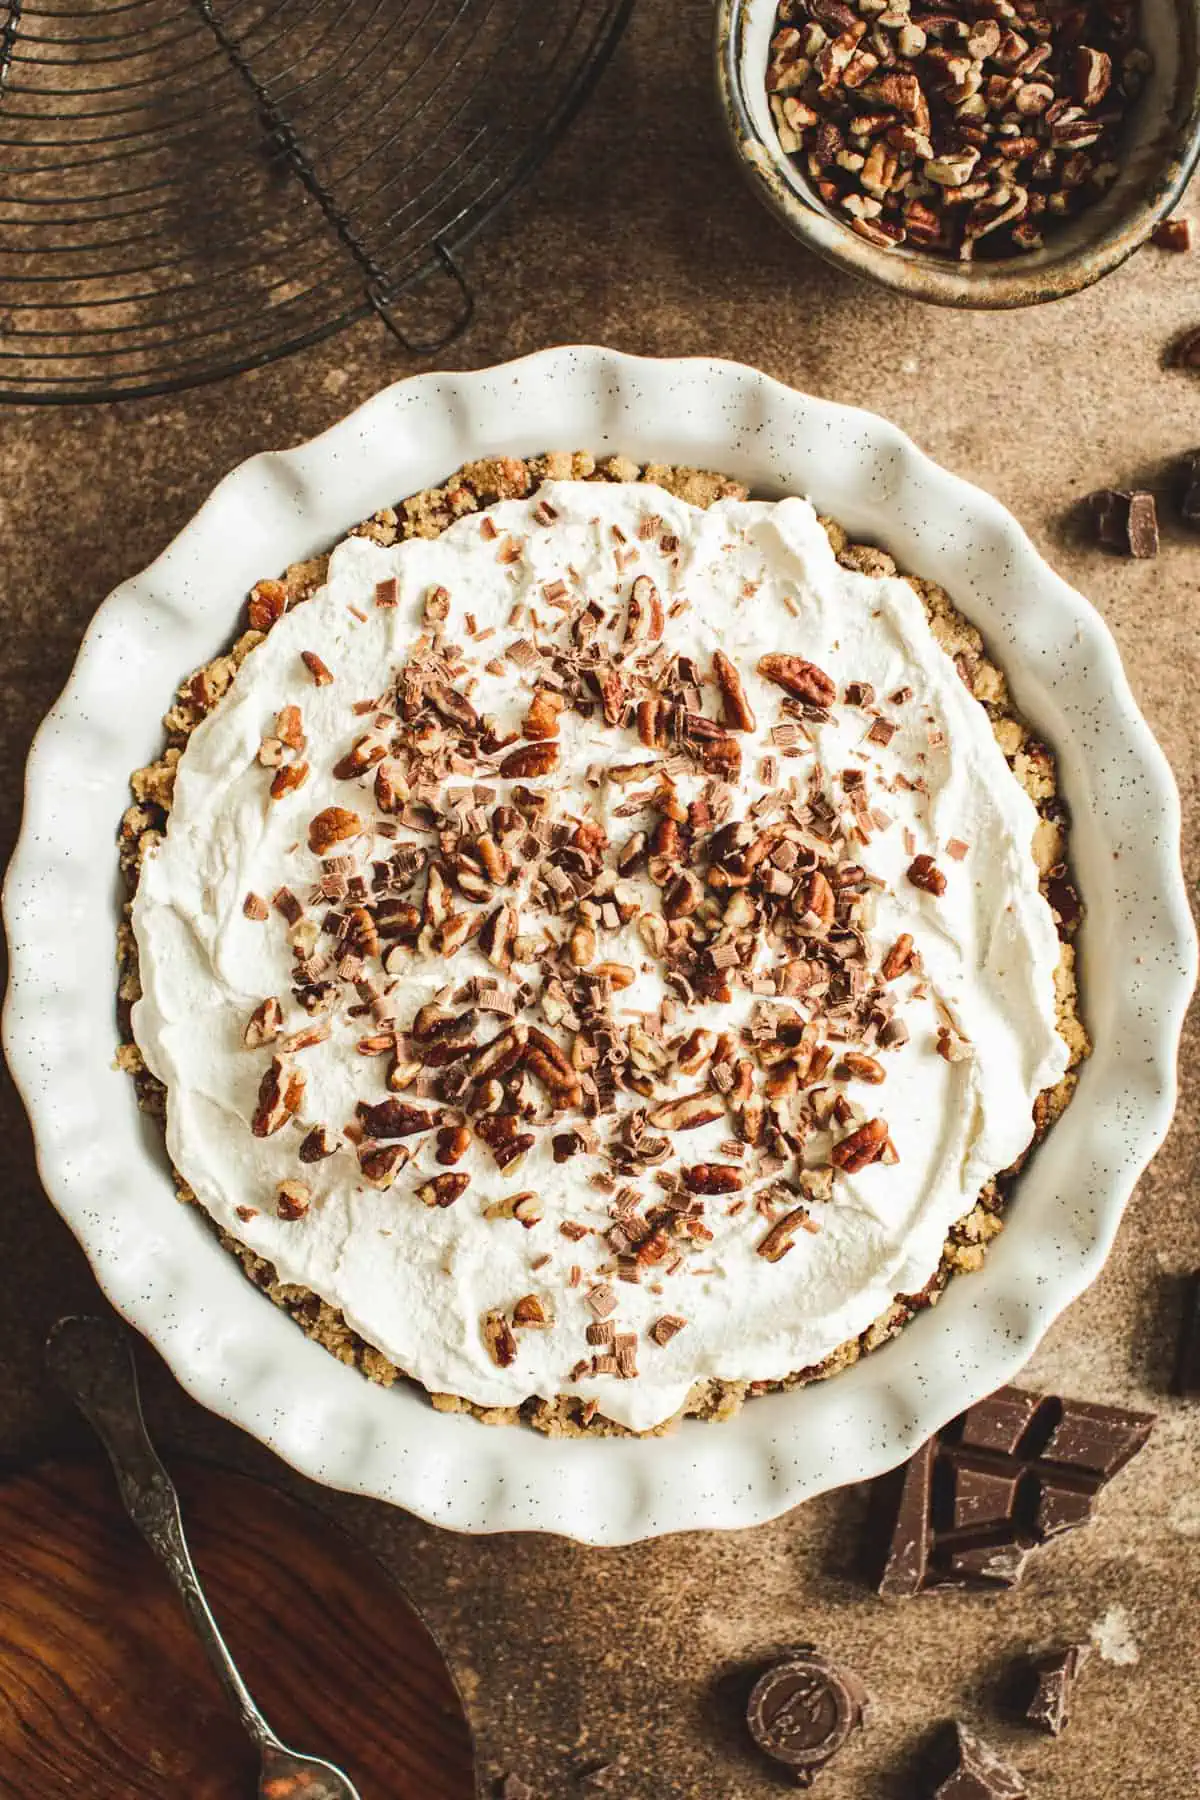 Cinnamon whipped cream spread on top of a pie.